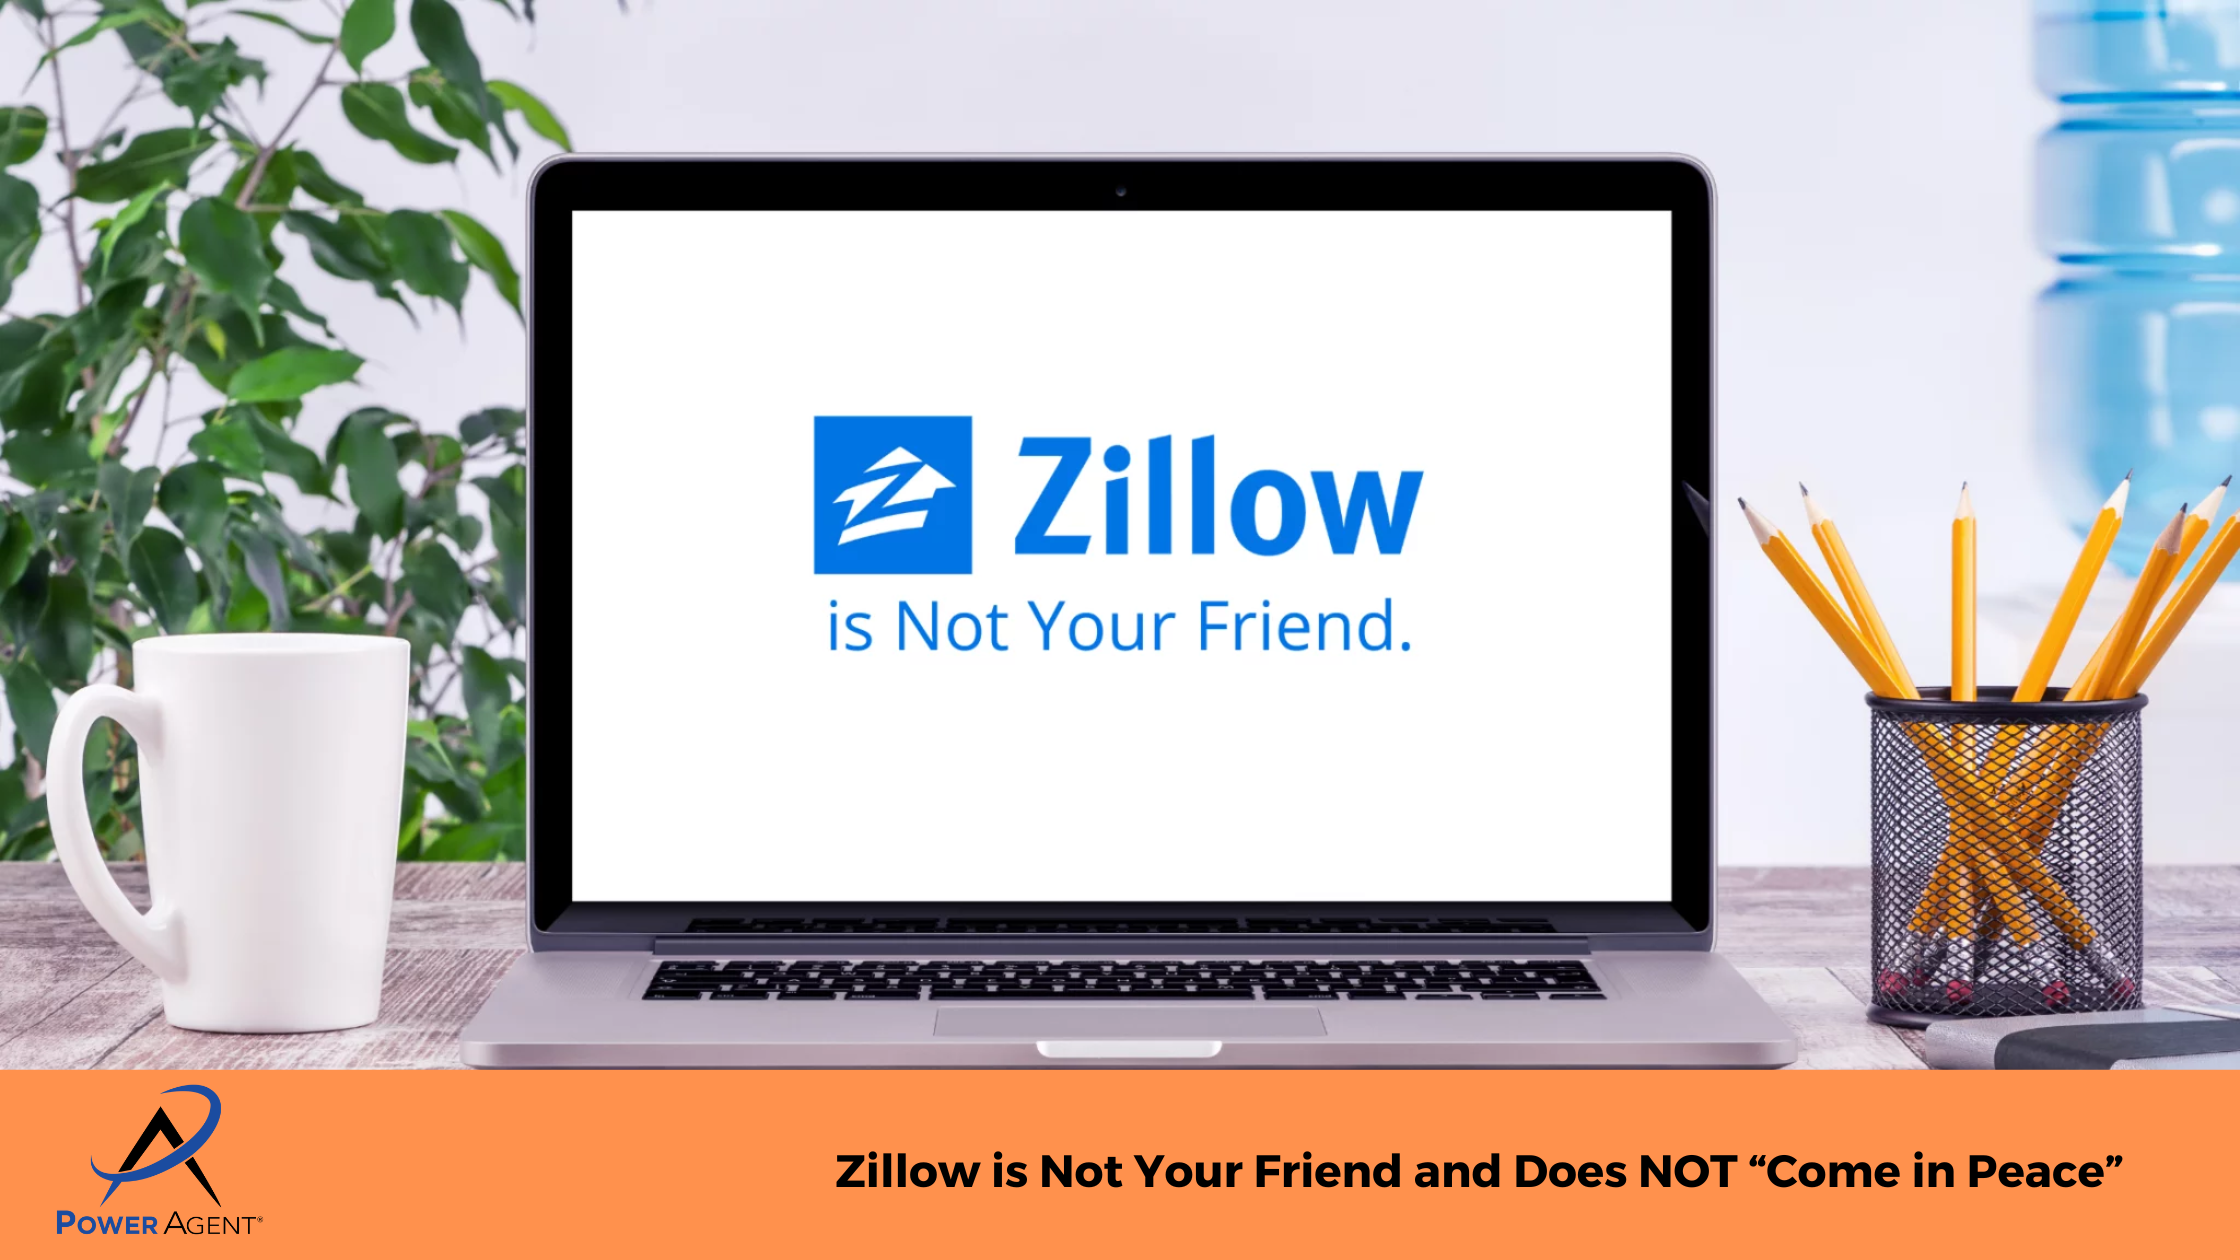 Zillow is Not Your Friend and Does NOT “Come in Peace”